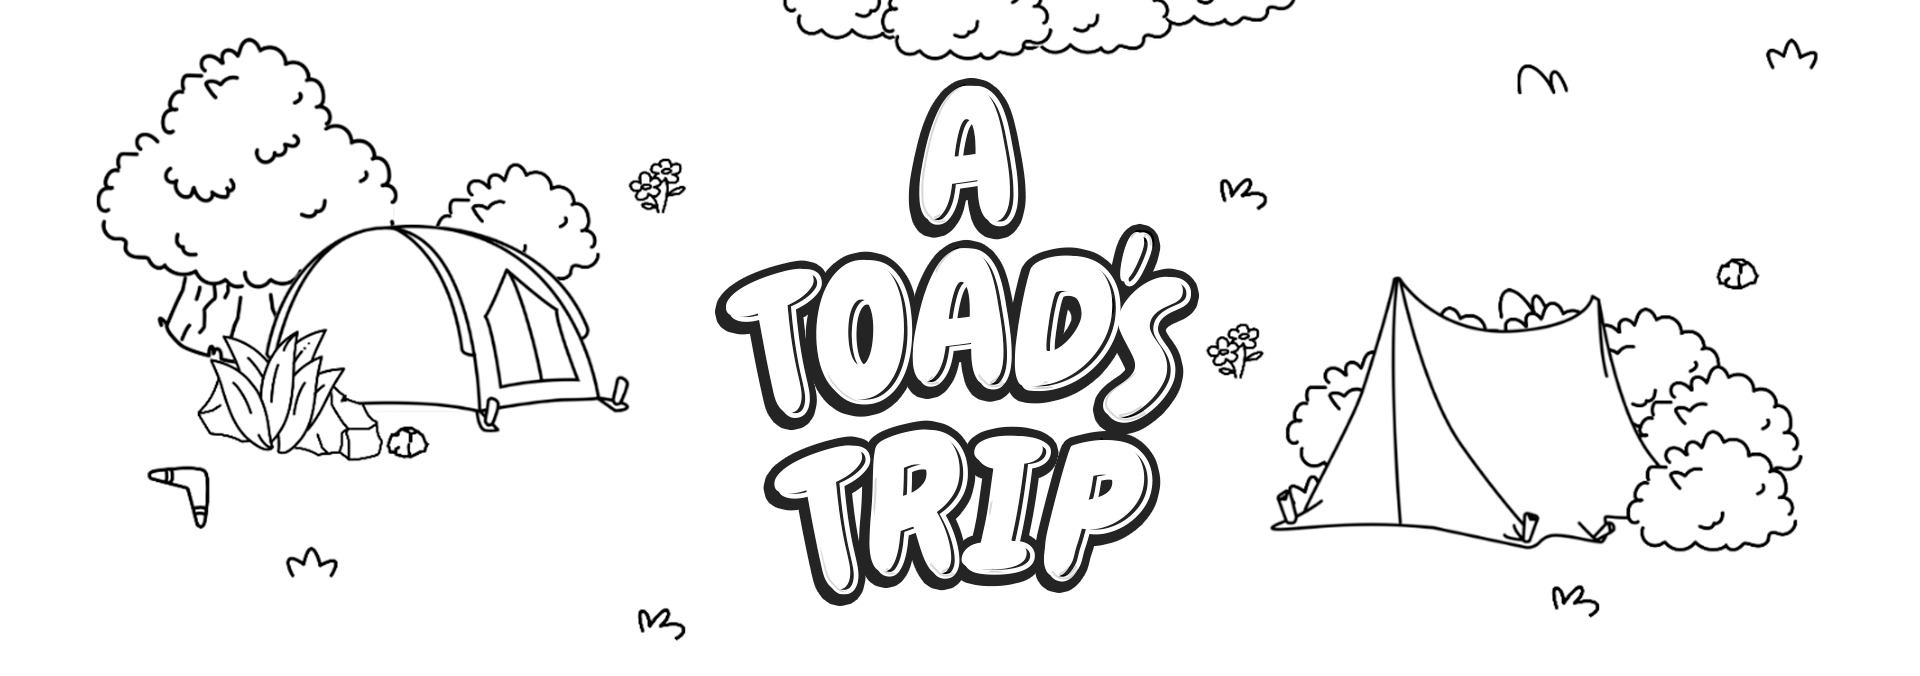 A Toad's Trip